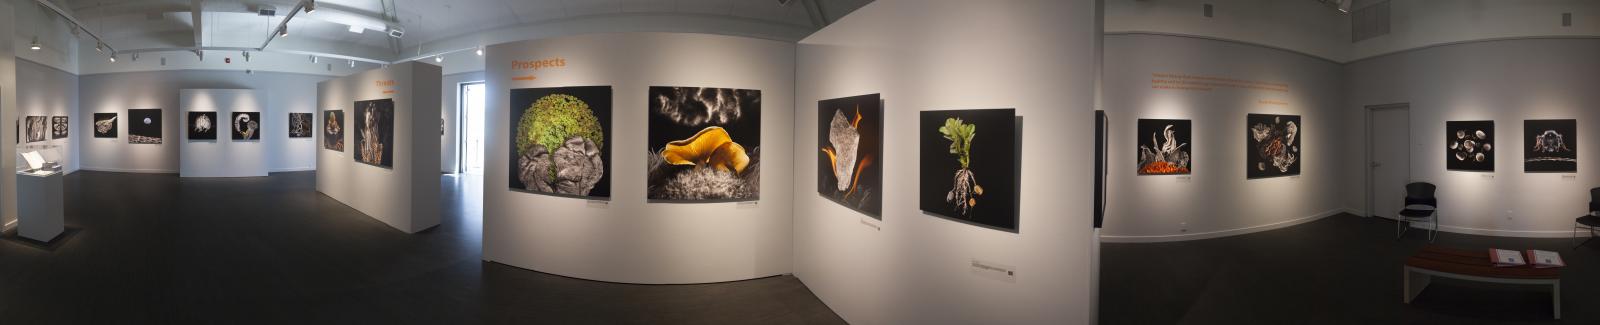 View Food for Thought Exhibition Images